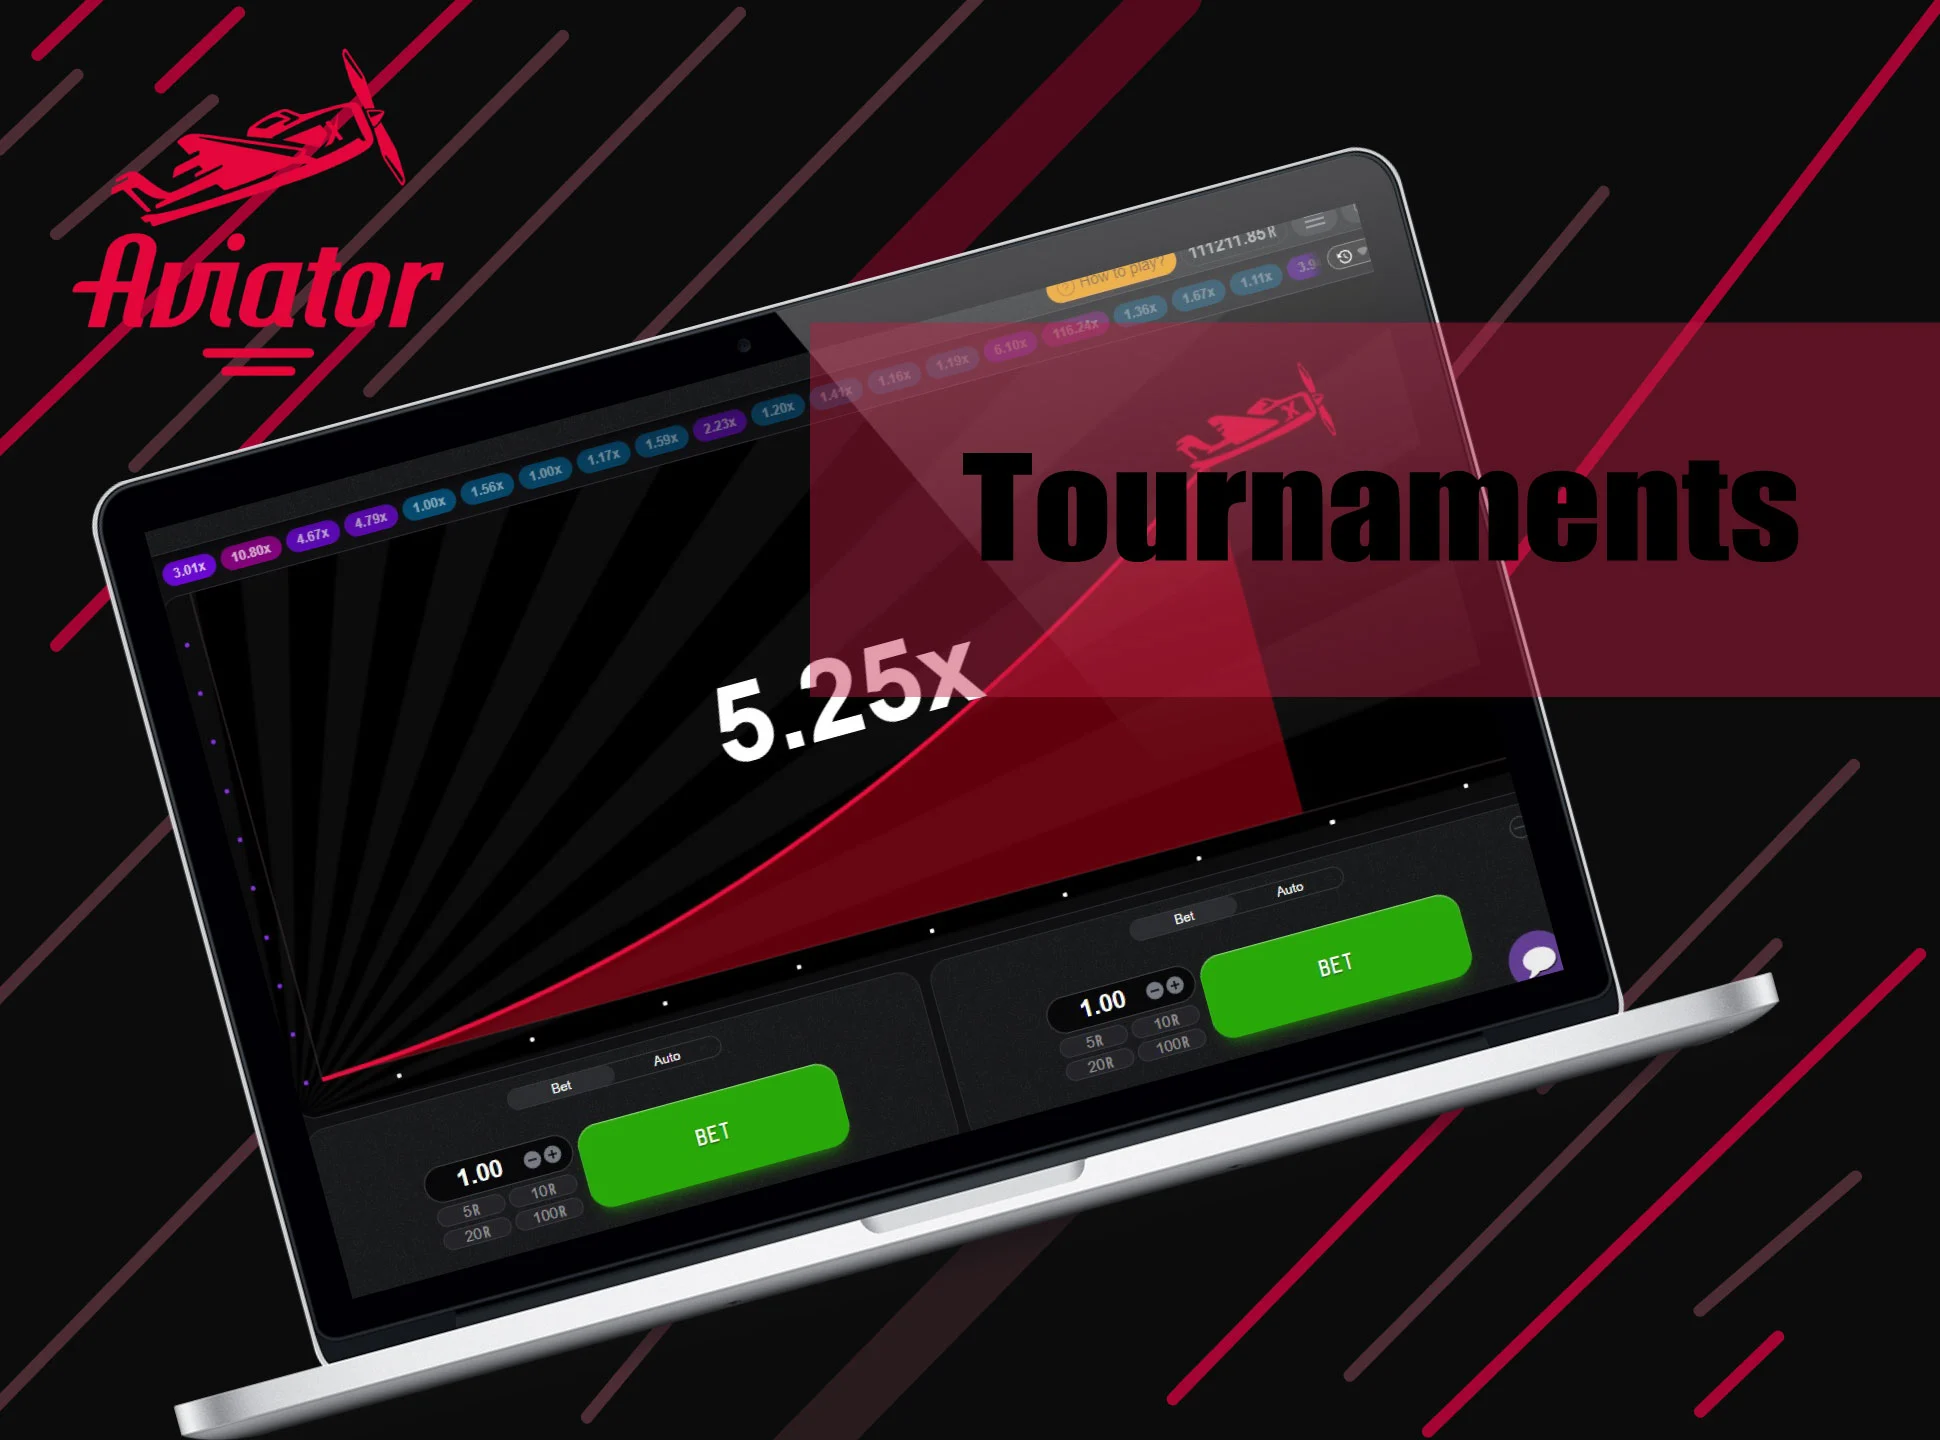 There are many various tournaments within Aviator games.